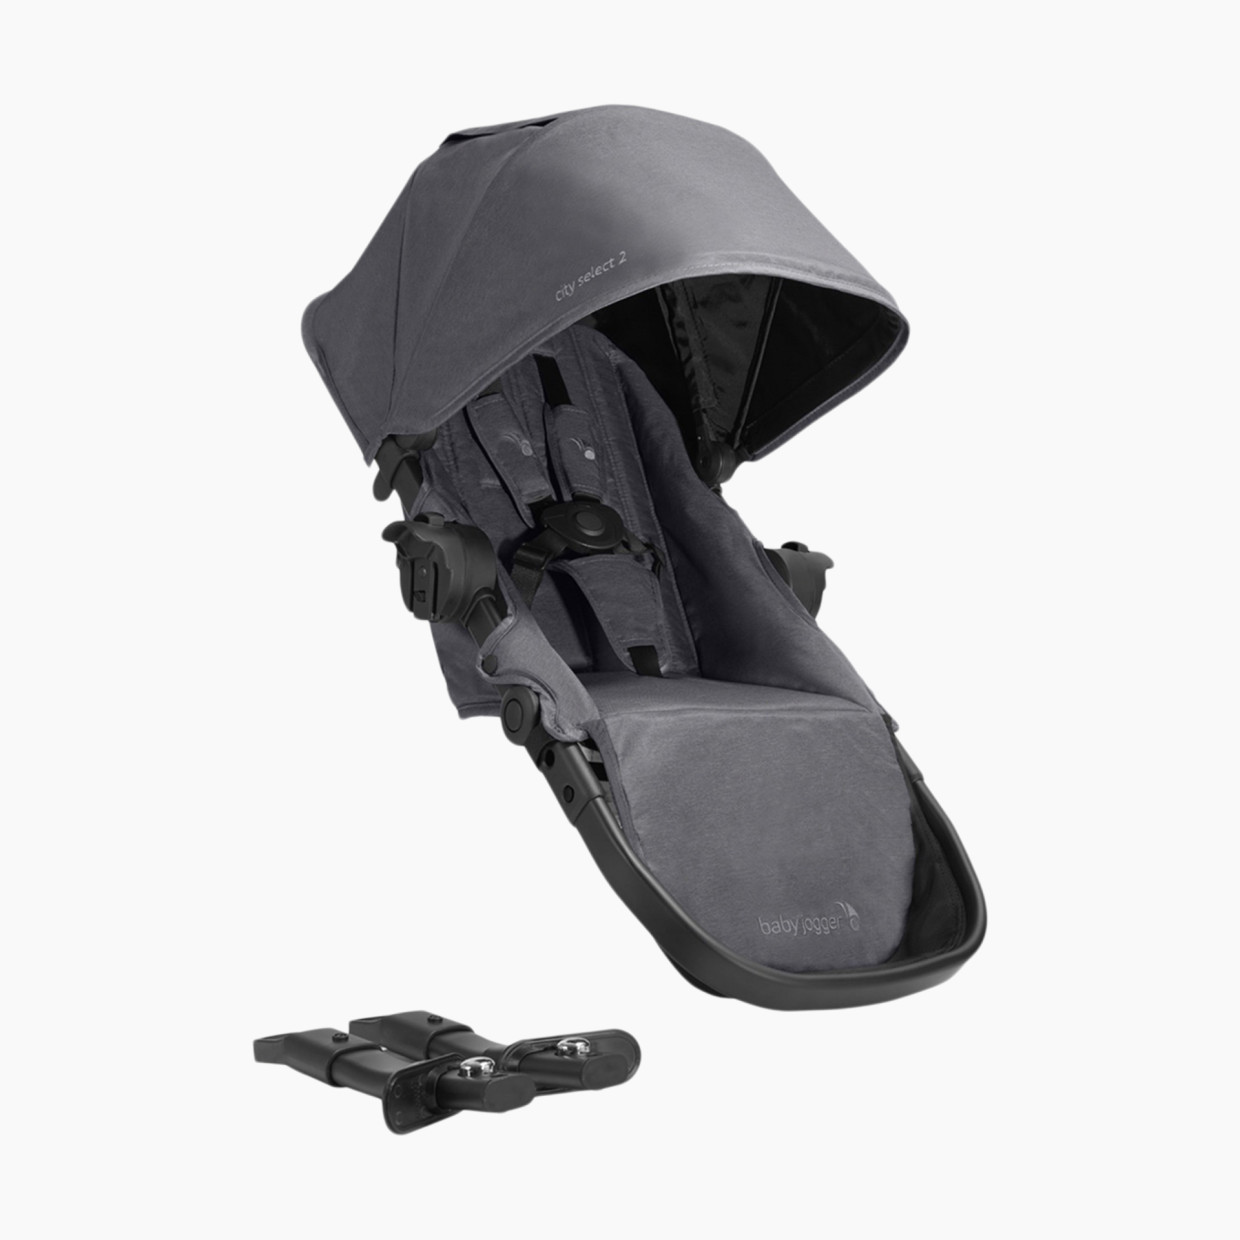 Baby Jogger Second Seat Kit for City Select 2 Stroller - Radiant Slate.